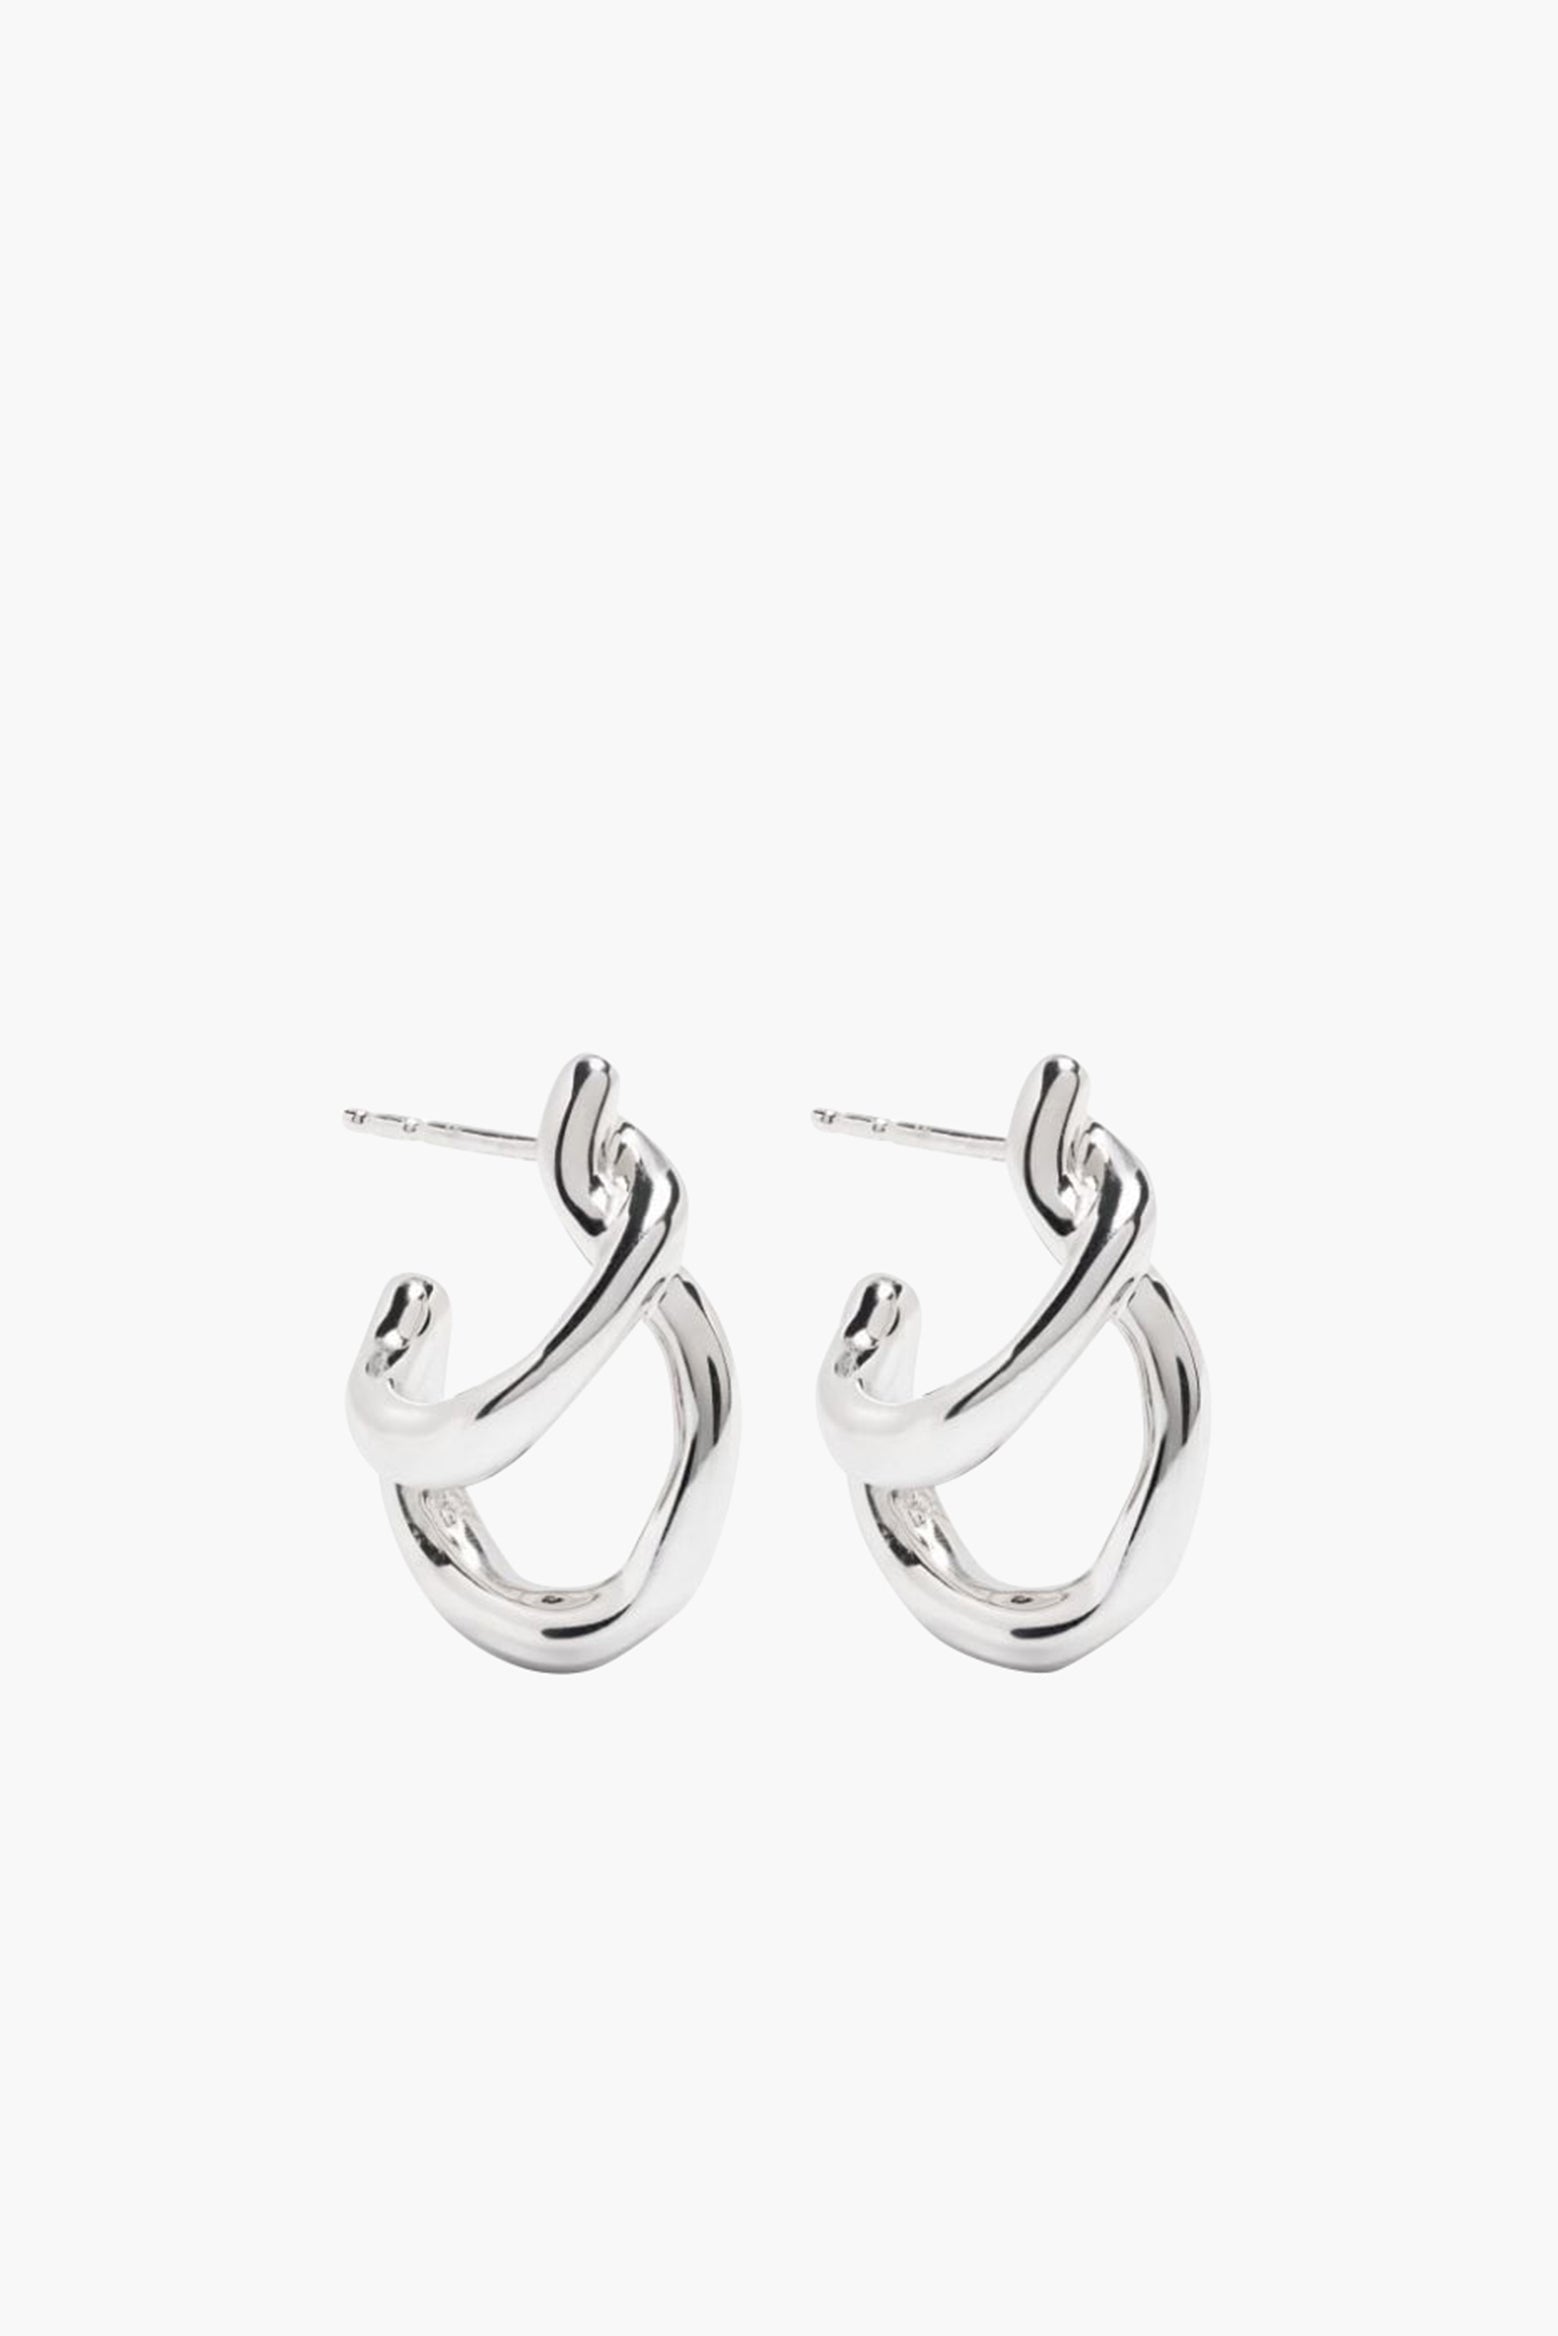 The Missoma Double Molten Hoop Earrings 2 in Silver available at The New Trend Australia